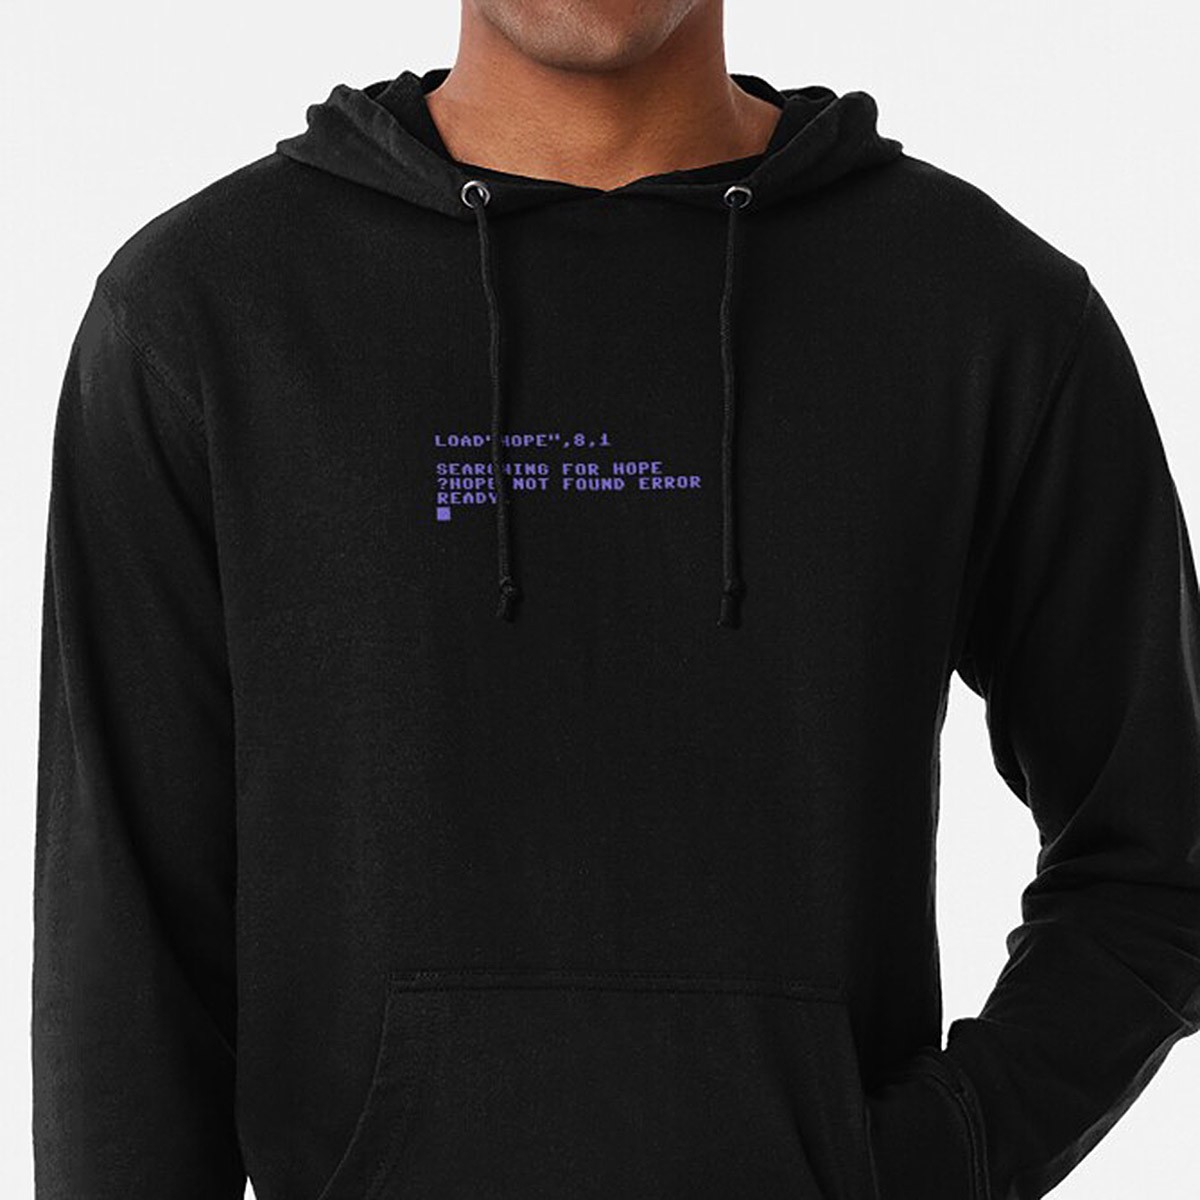 Commodore C64 Load Error - Hope Not Found Lightweight Hoodie by NTK Apparel